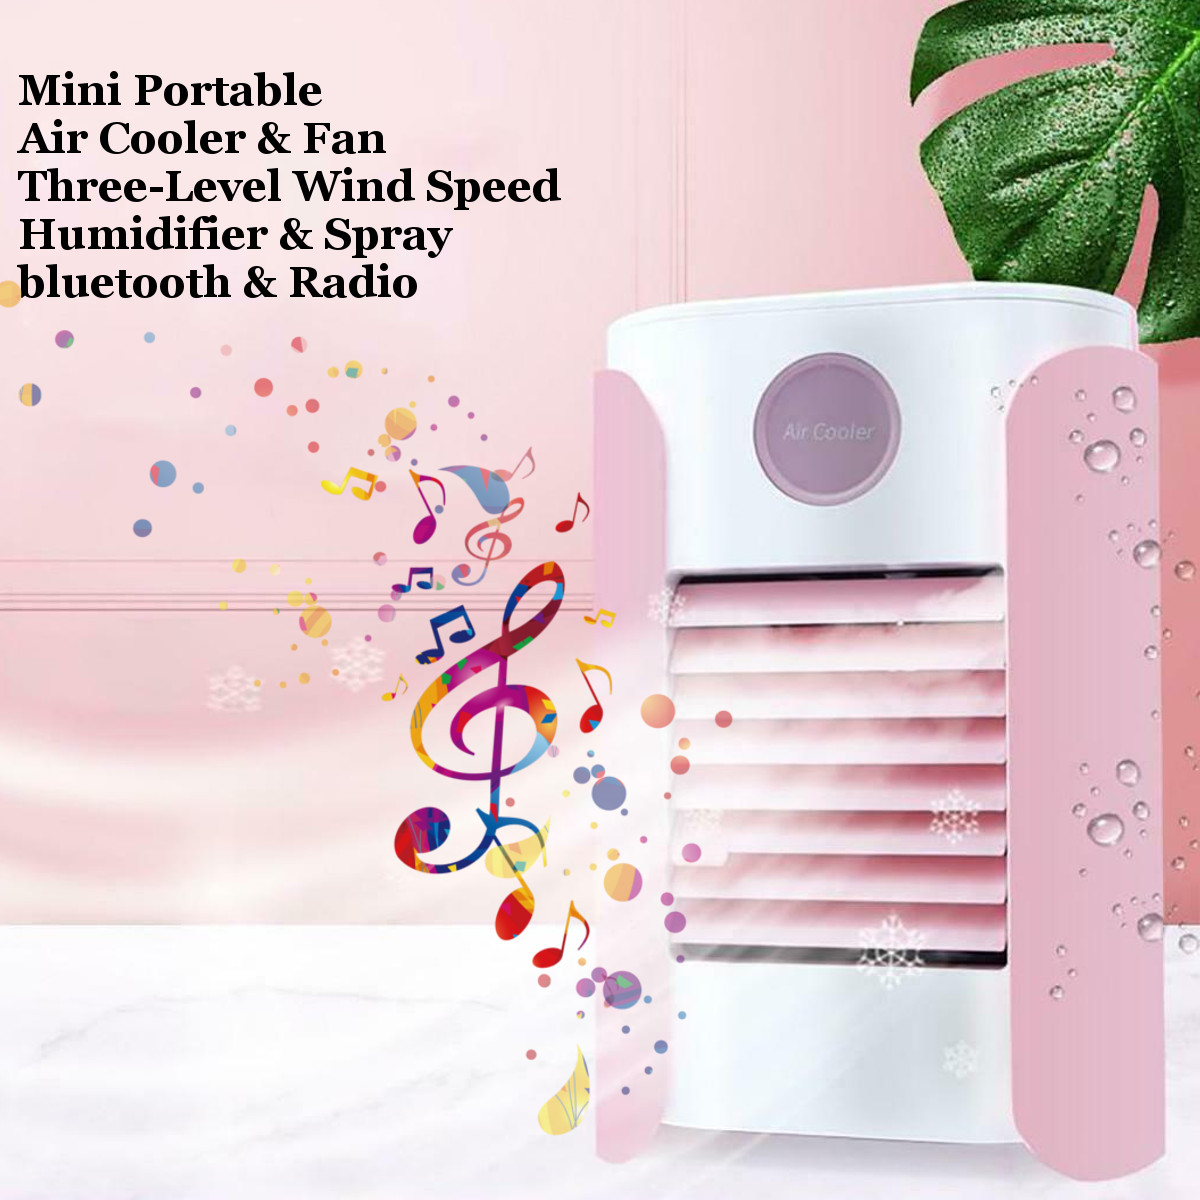 USB-Mini-Portable-Bluetooth-Radio-Air-Cooler-Humidifier-Conditioning-Mute-Spray-Cooling-Fan-1690137-3